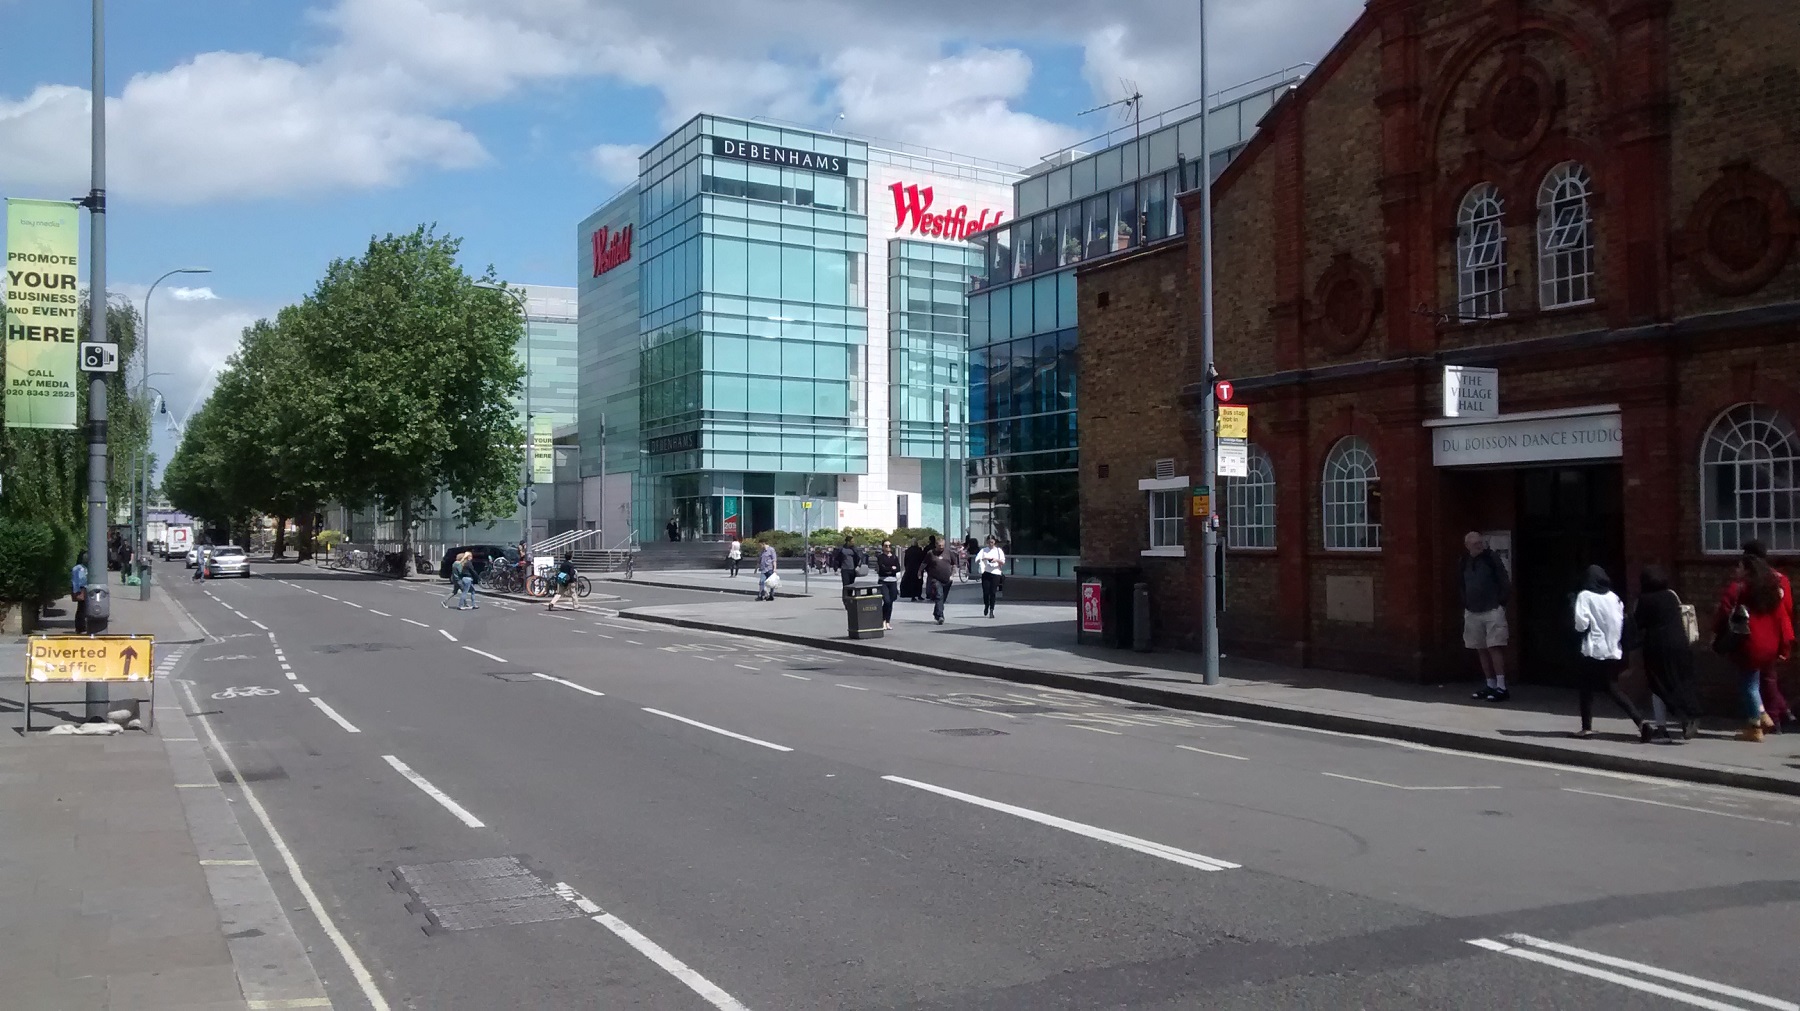 The edge of Westfield Shopping centre in Wood Lane London viewed on a sunny summer day.